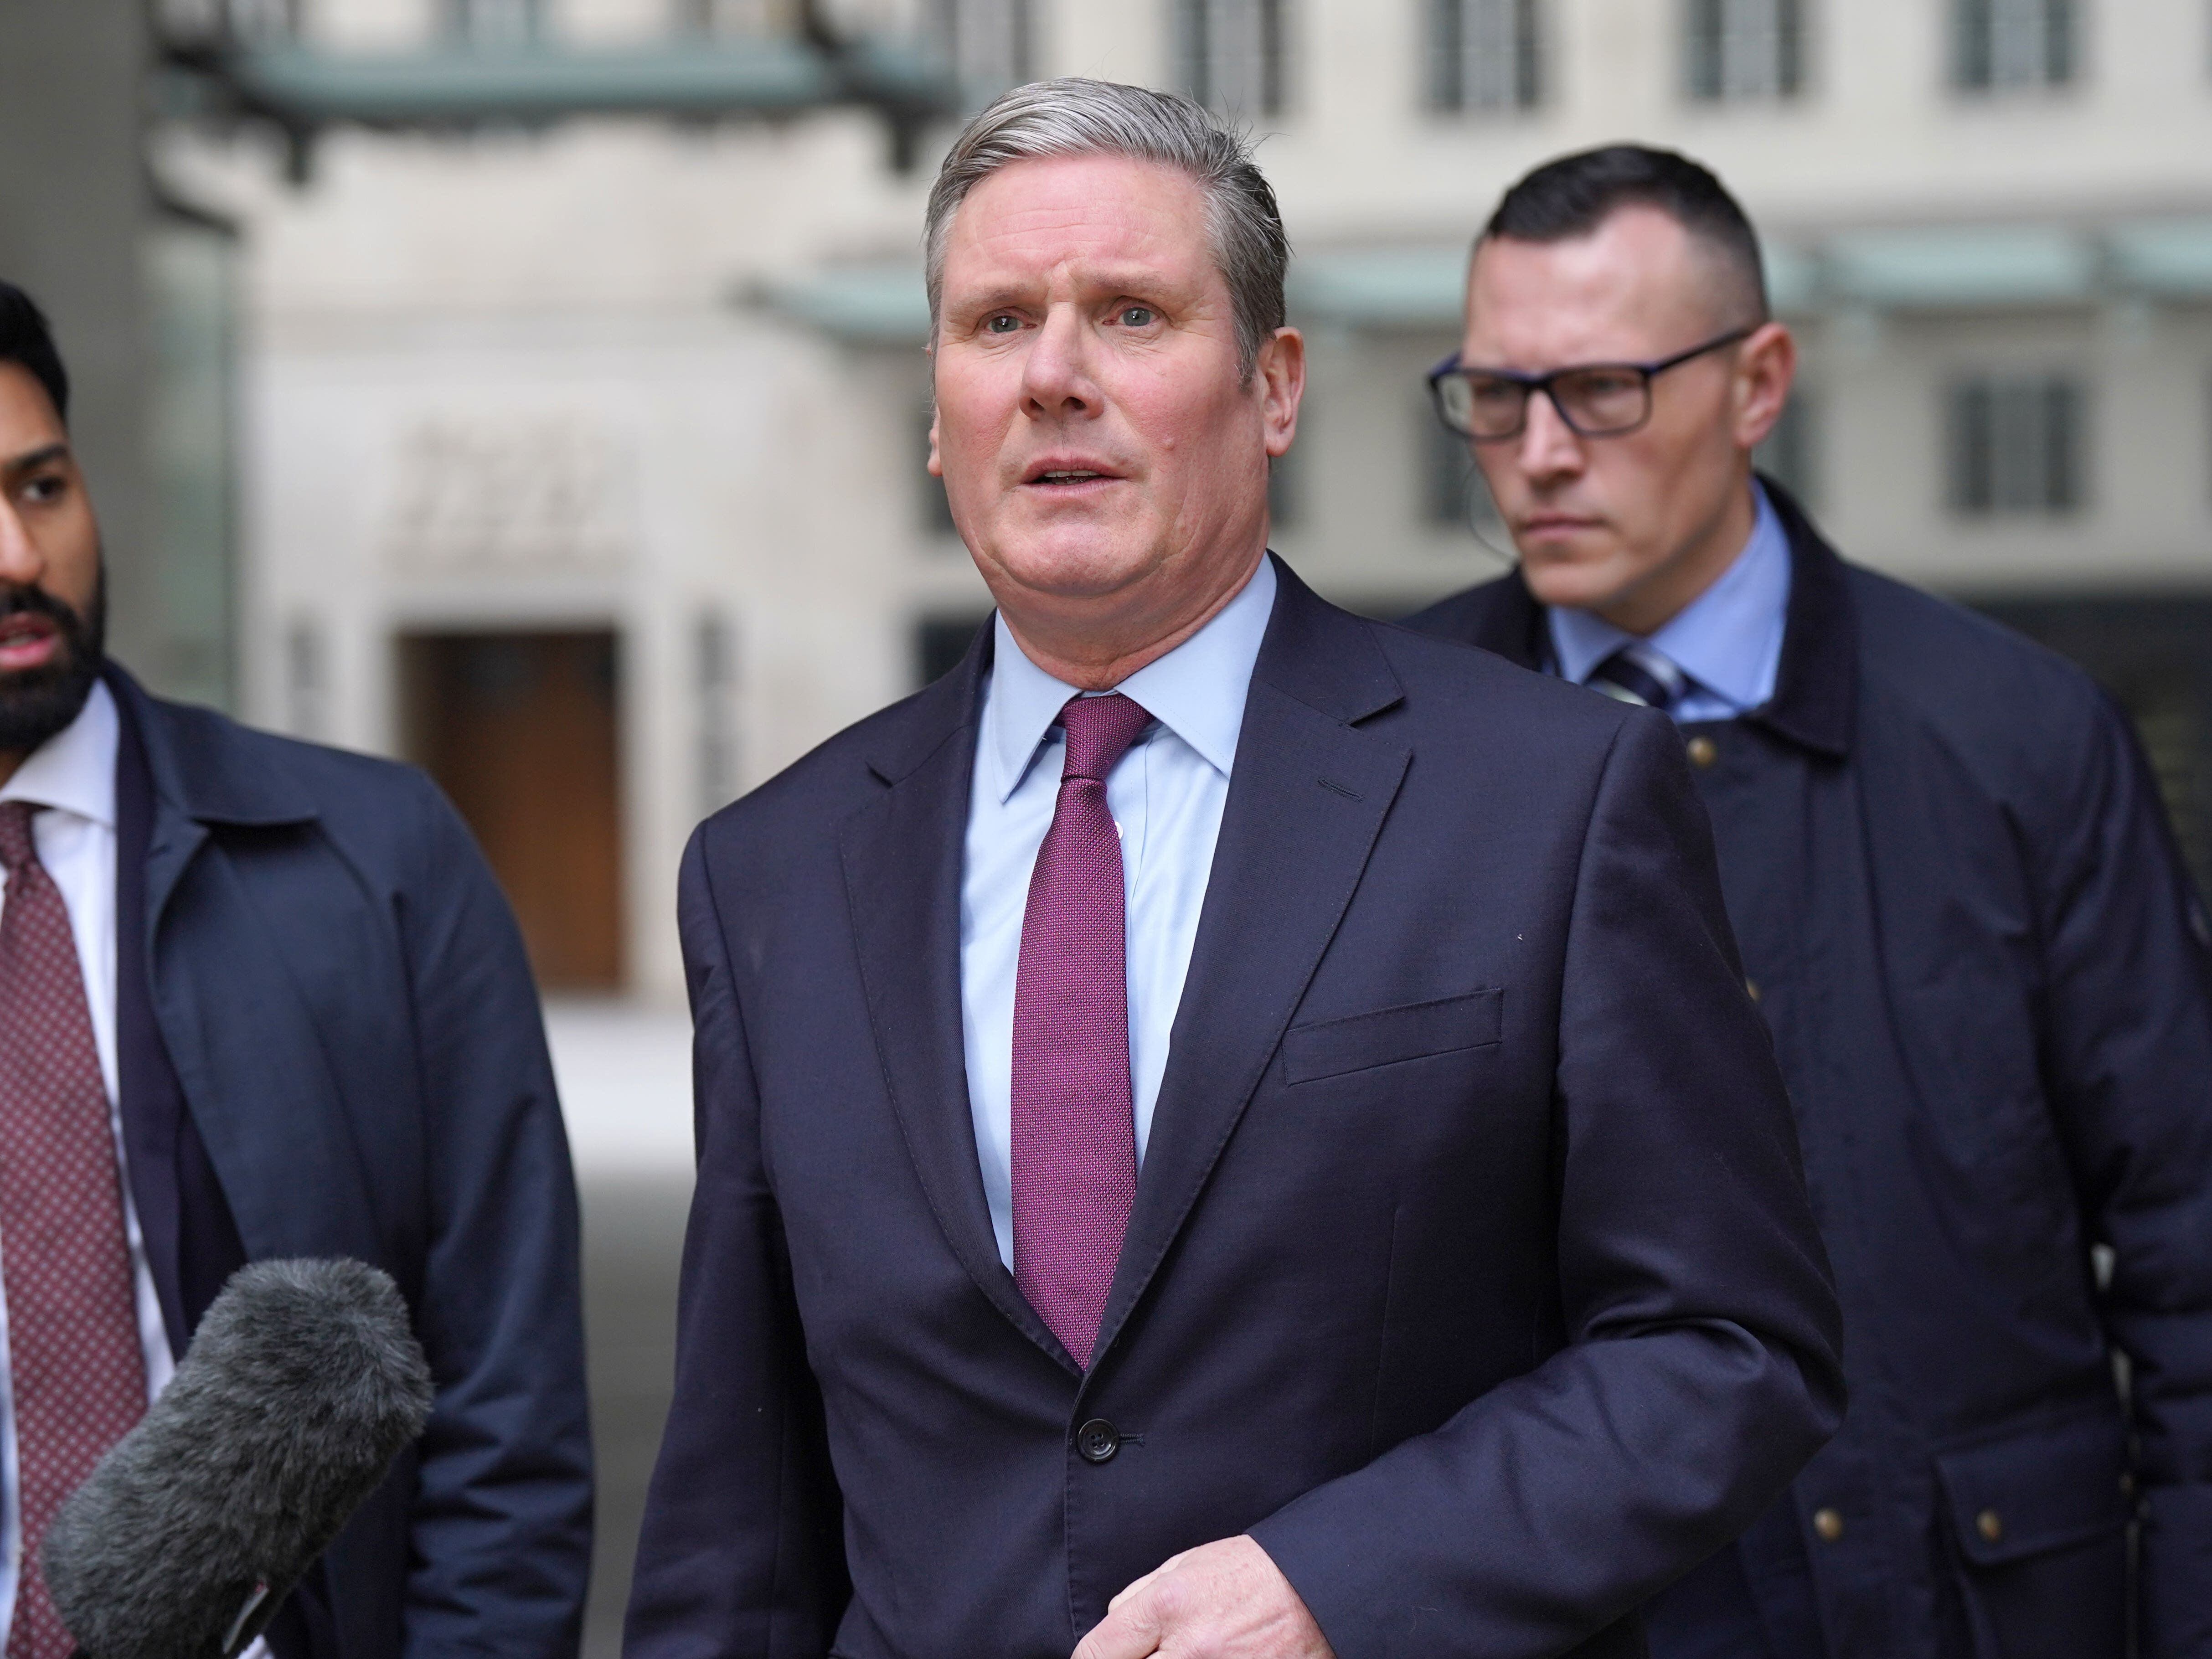 Keir Starmer defends accepting Qatari private jet for talks with leader